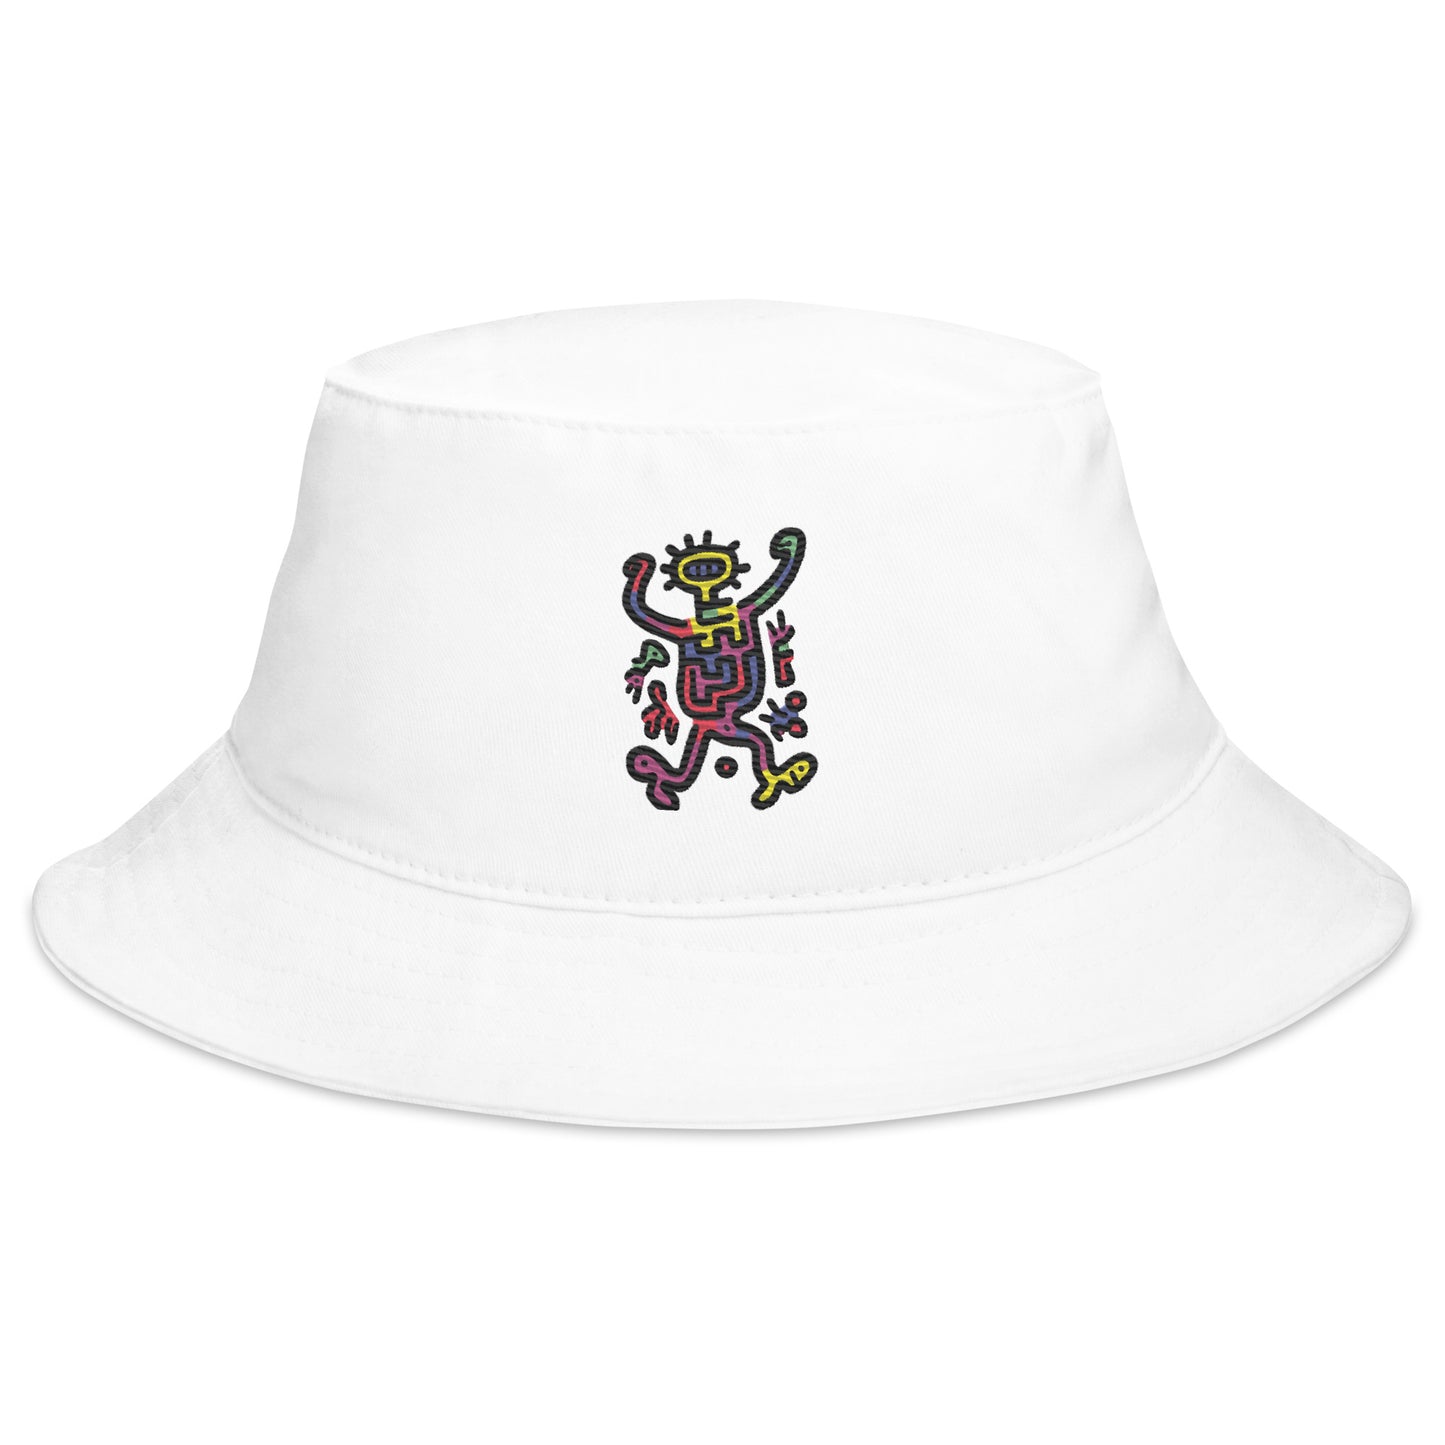 Doodles Me "Most Wanted" Bucket Hat #6